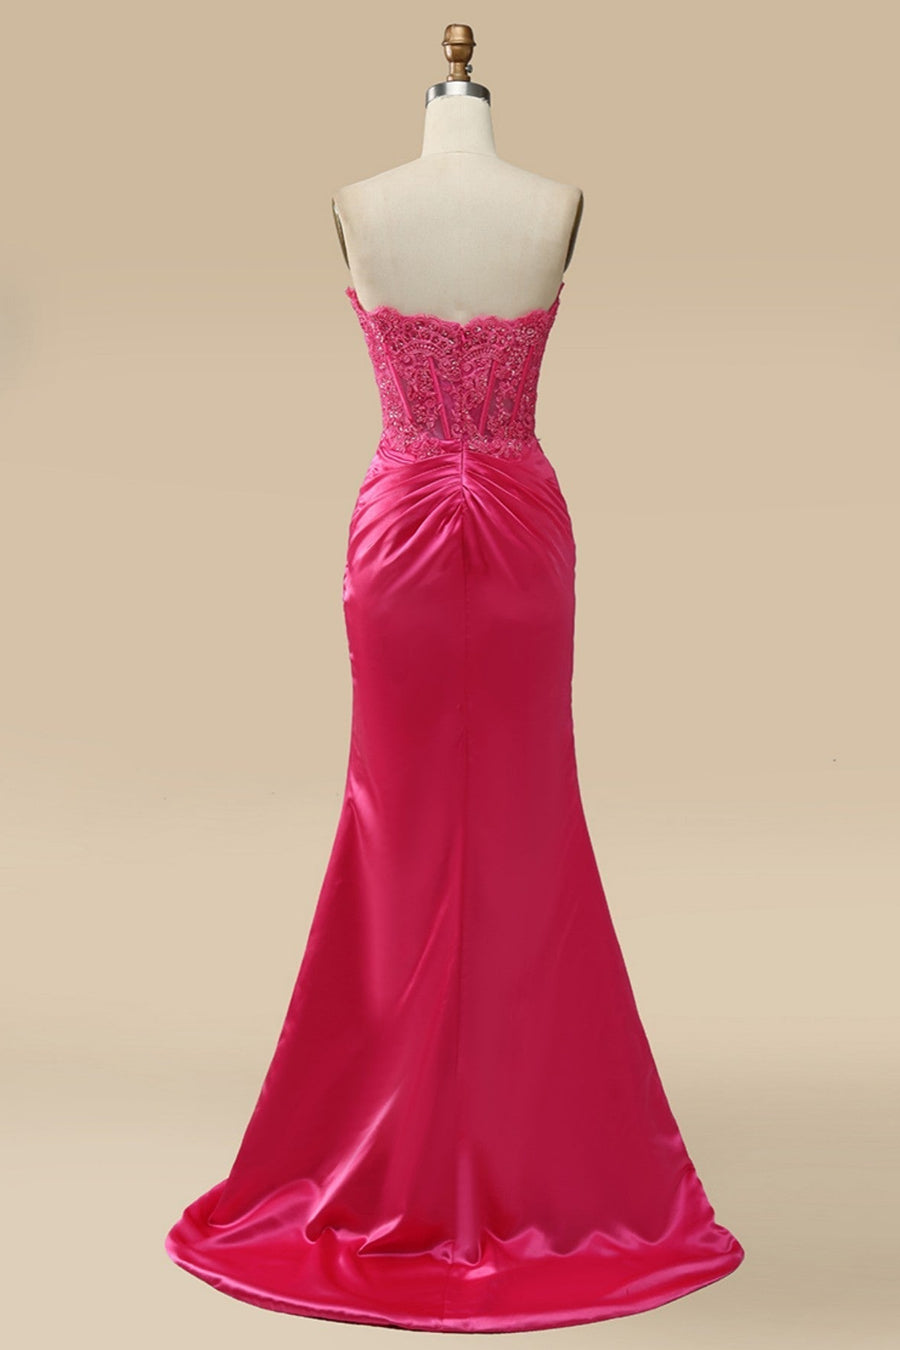 Fuchsia Strapless Appliques Mermaid Long Prom Dress with Slit